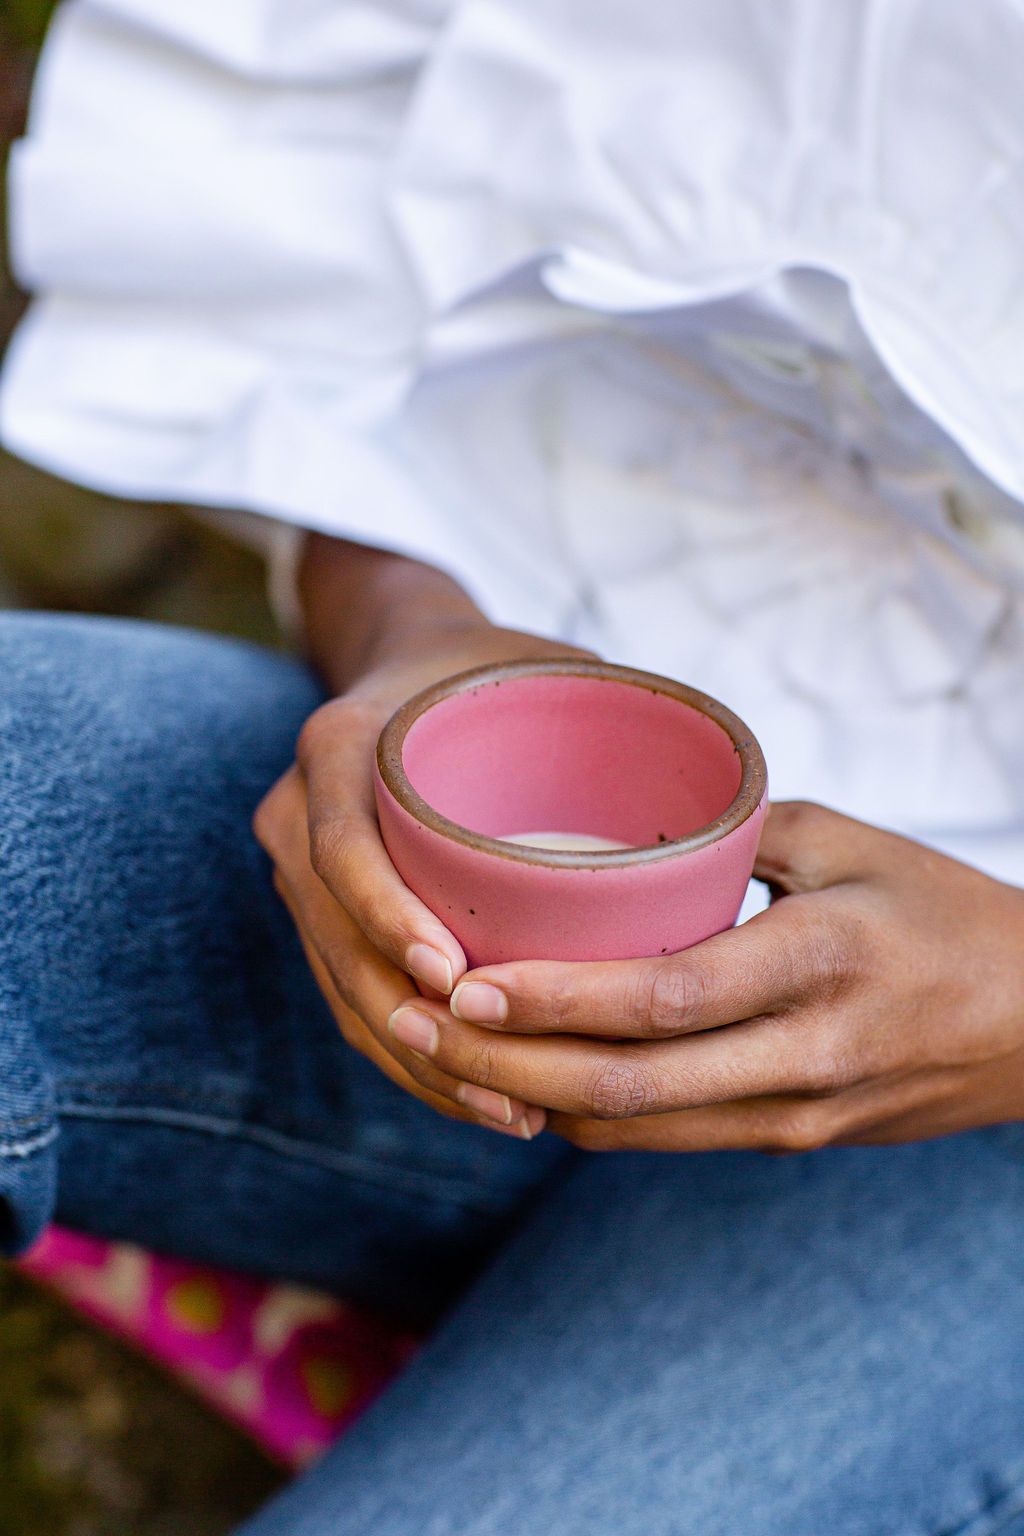 A close up of the hands of Sana Javeri Kadri, Diaspora Co.’s founder, as she holds a hot pink East Fork kuhlad (a handleless mug designed off of the traditional South Asian cup).